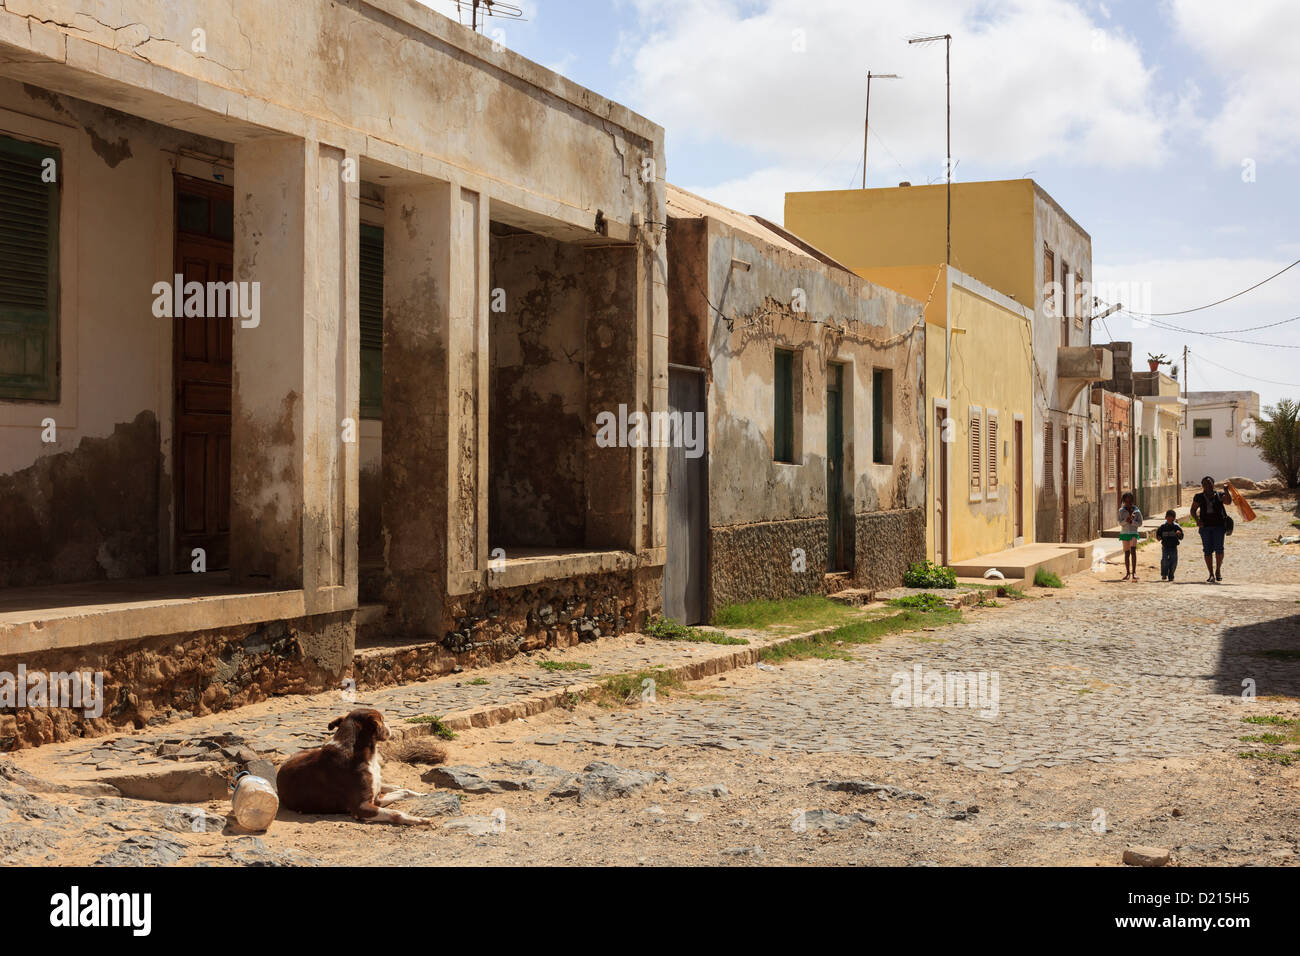 Ramshackle colonial buildings with dog in typical street scene in Sal Rei, Boa Vista, Cape Verde Islands, Africa. Stock Photo